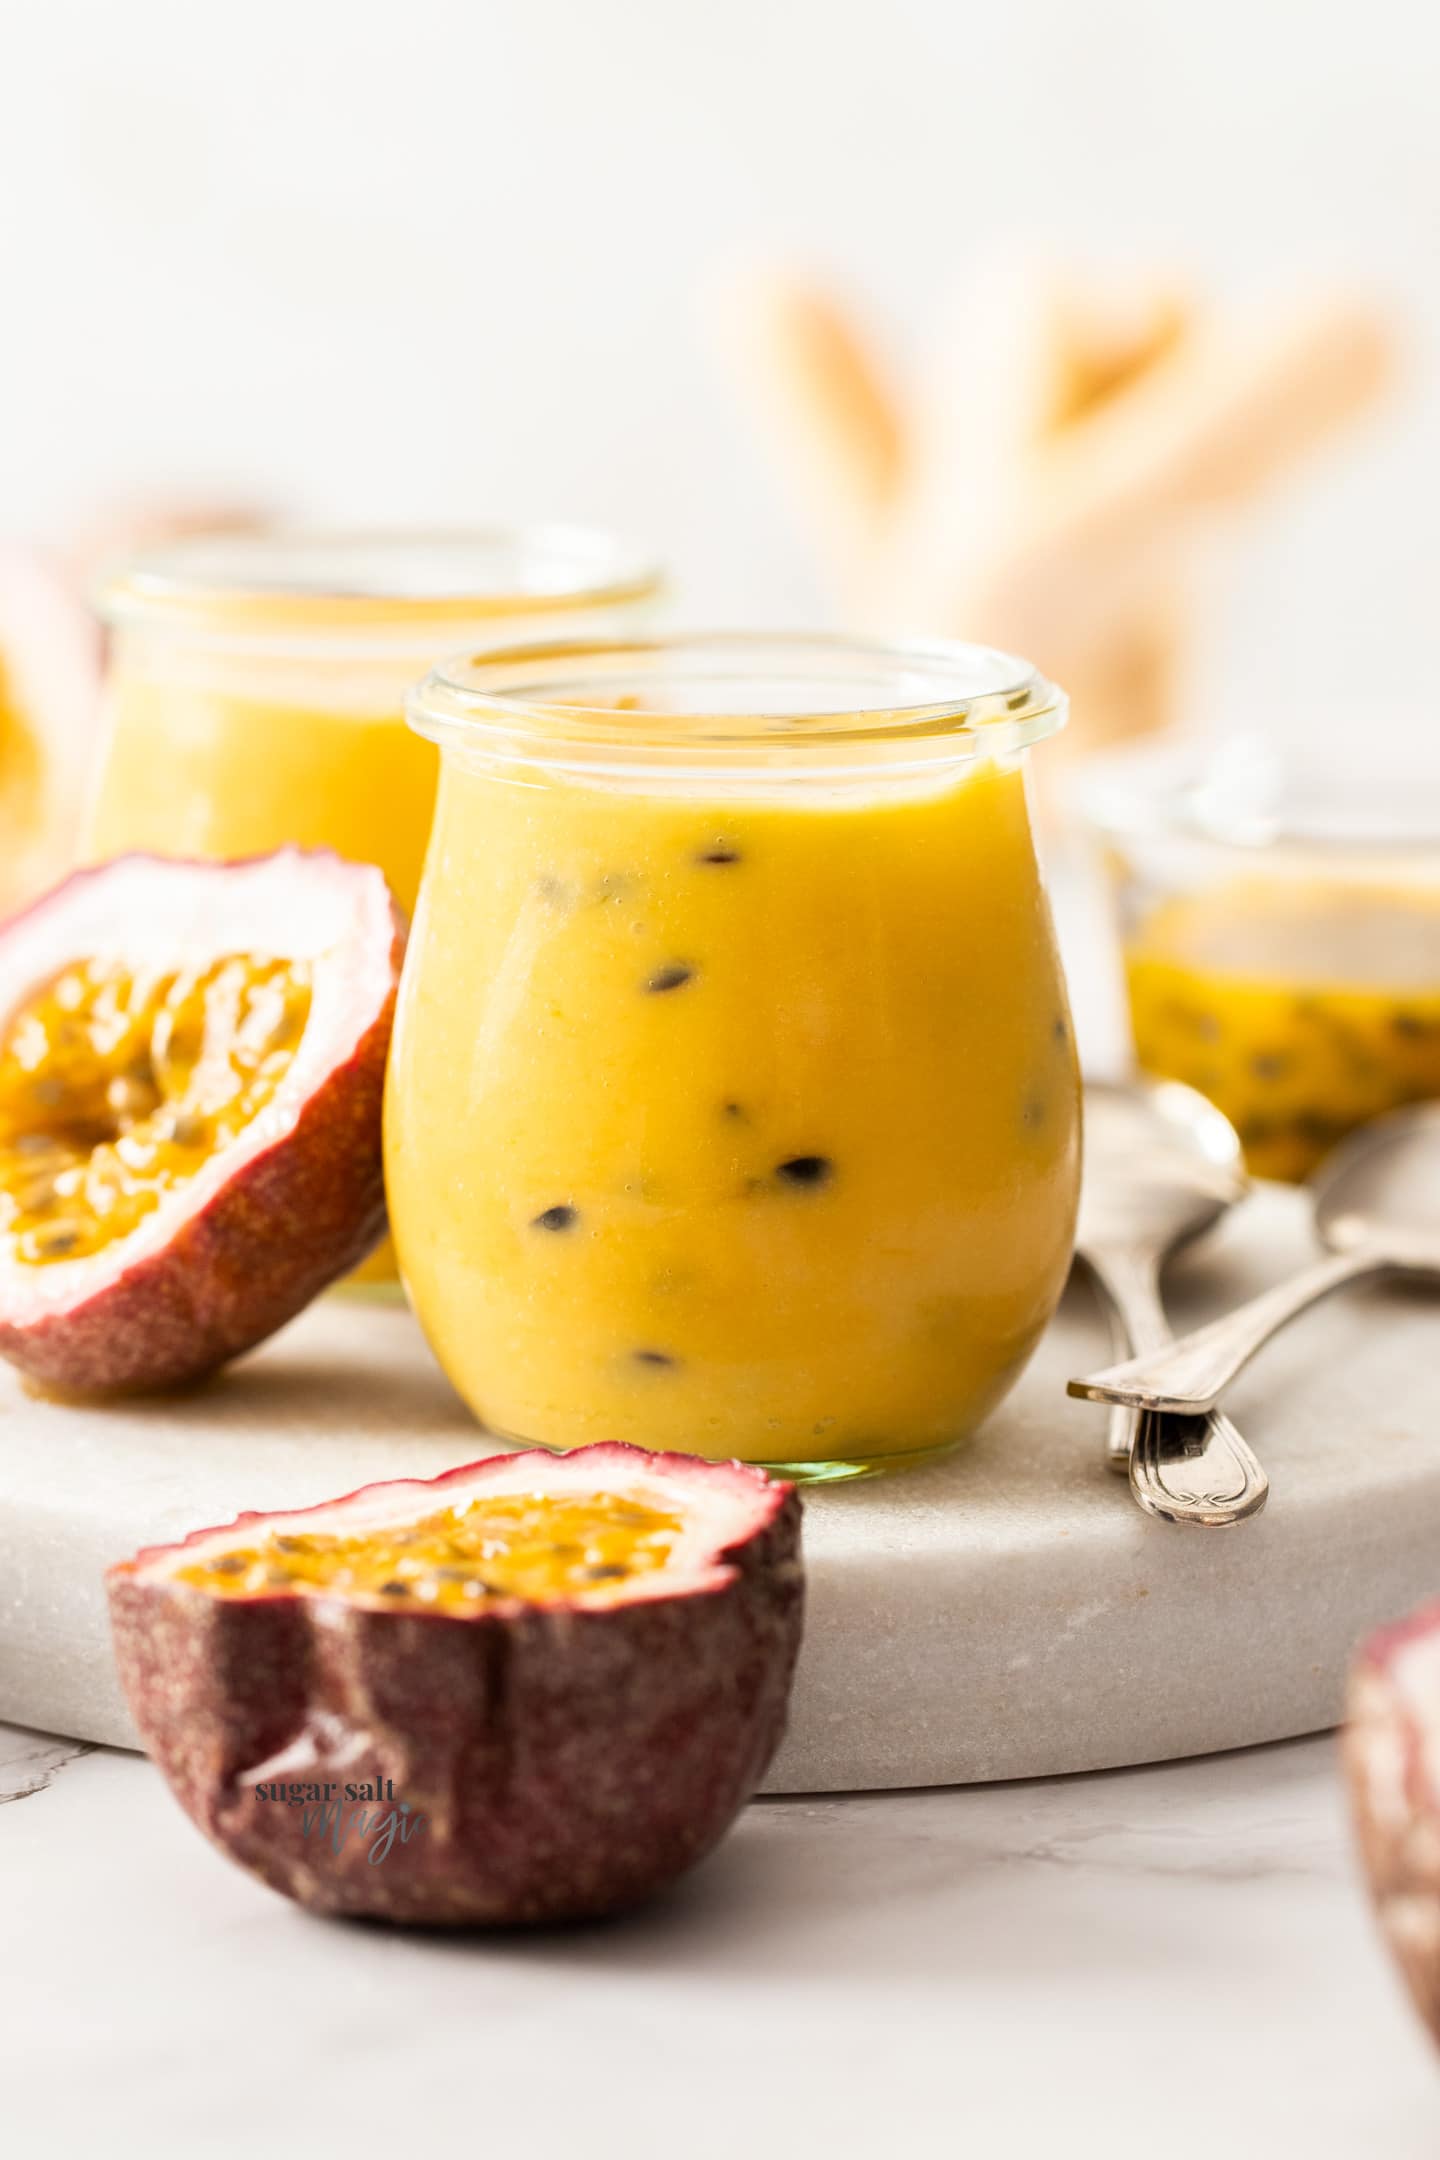 A small jar filled with passionfruit curd.